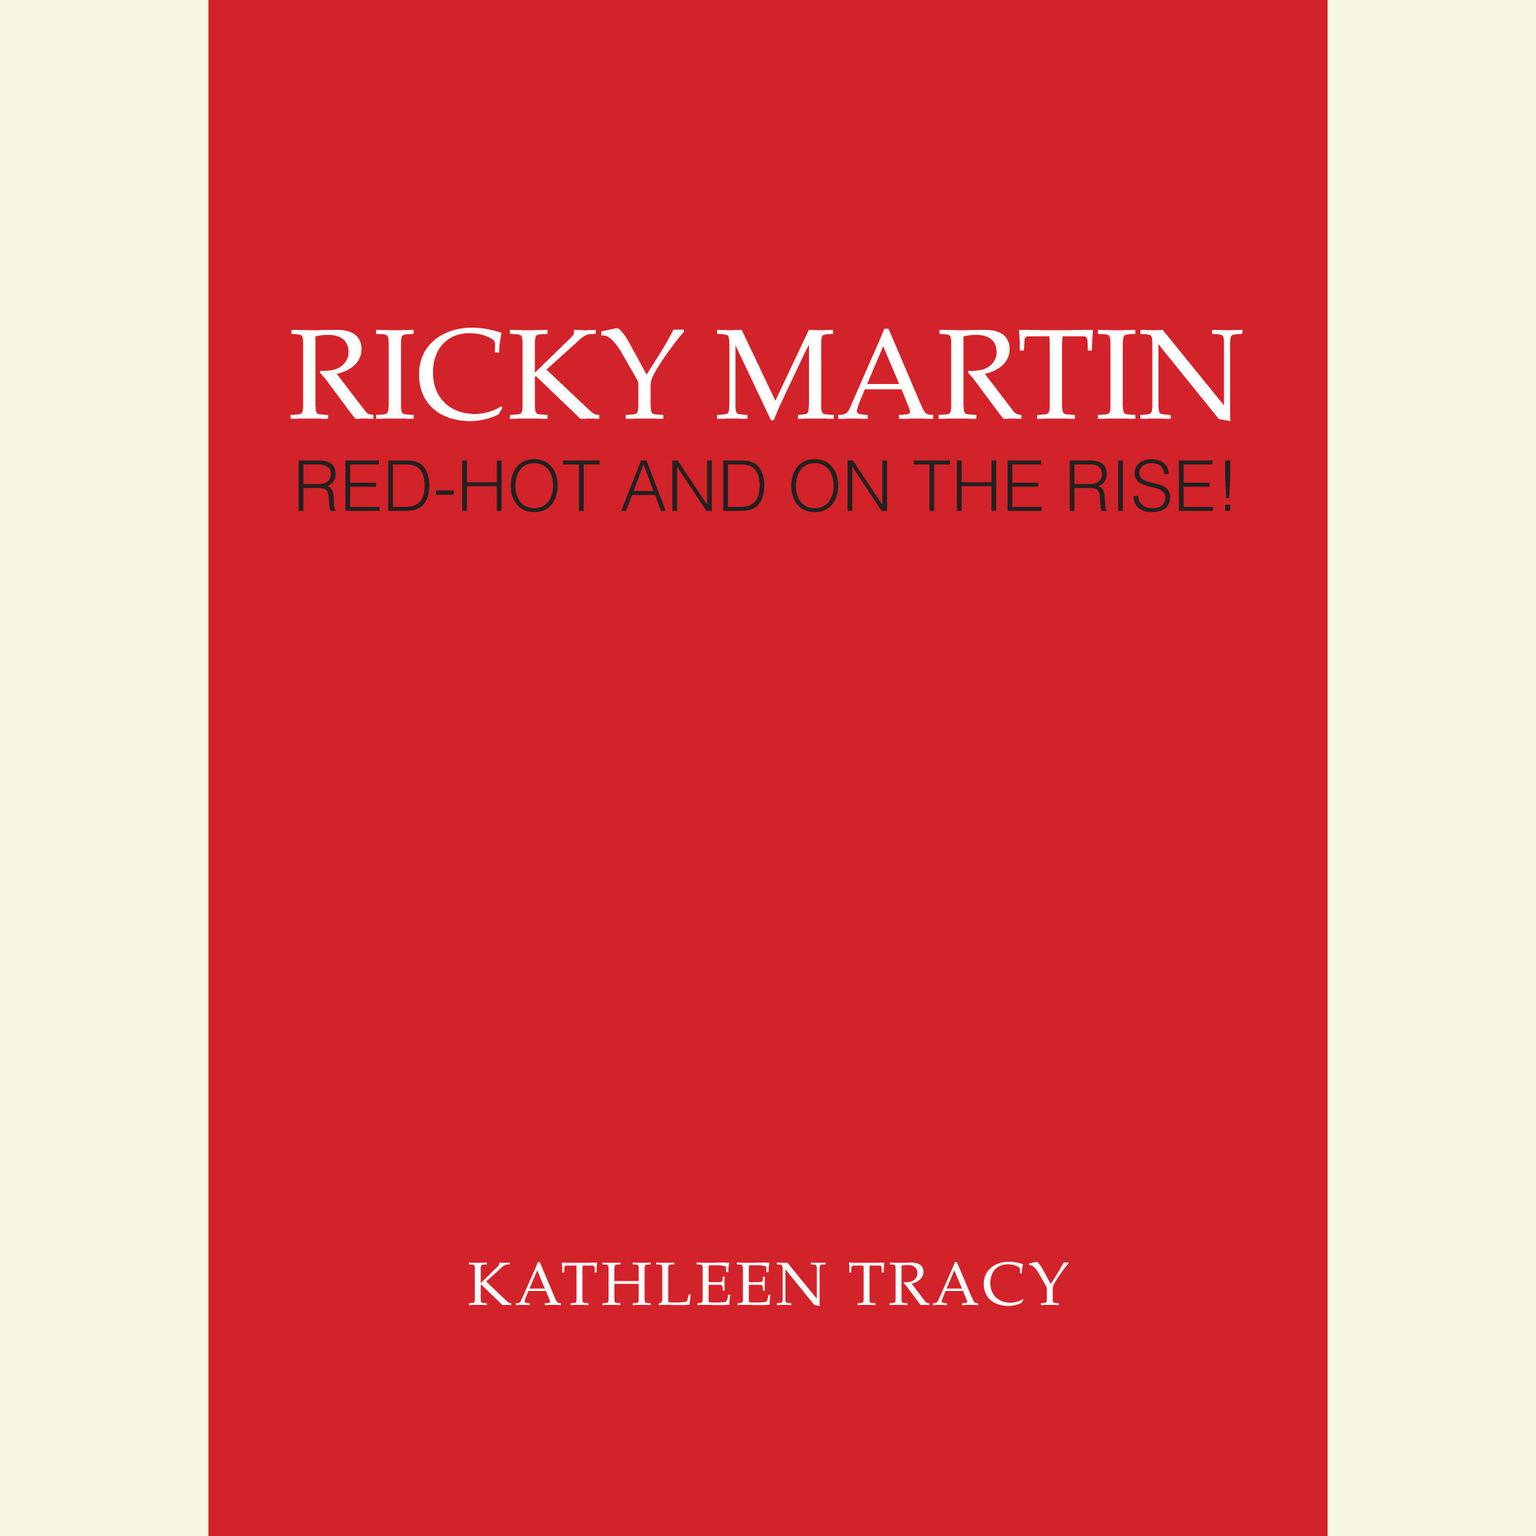 Ricky Martin: Red-Hot and on the Rise!: Red-Hot and on the Rise! Audiobook, by Kathleen Tracy